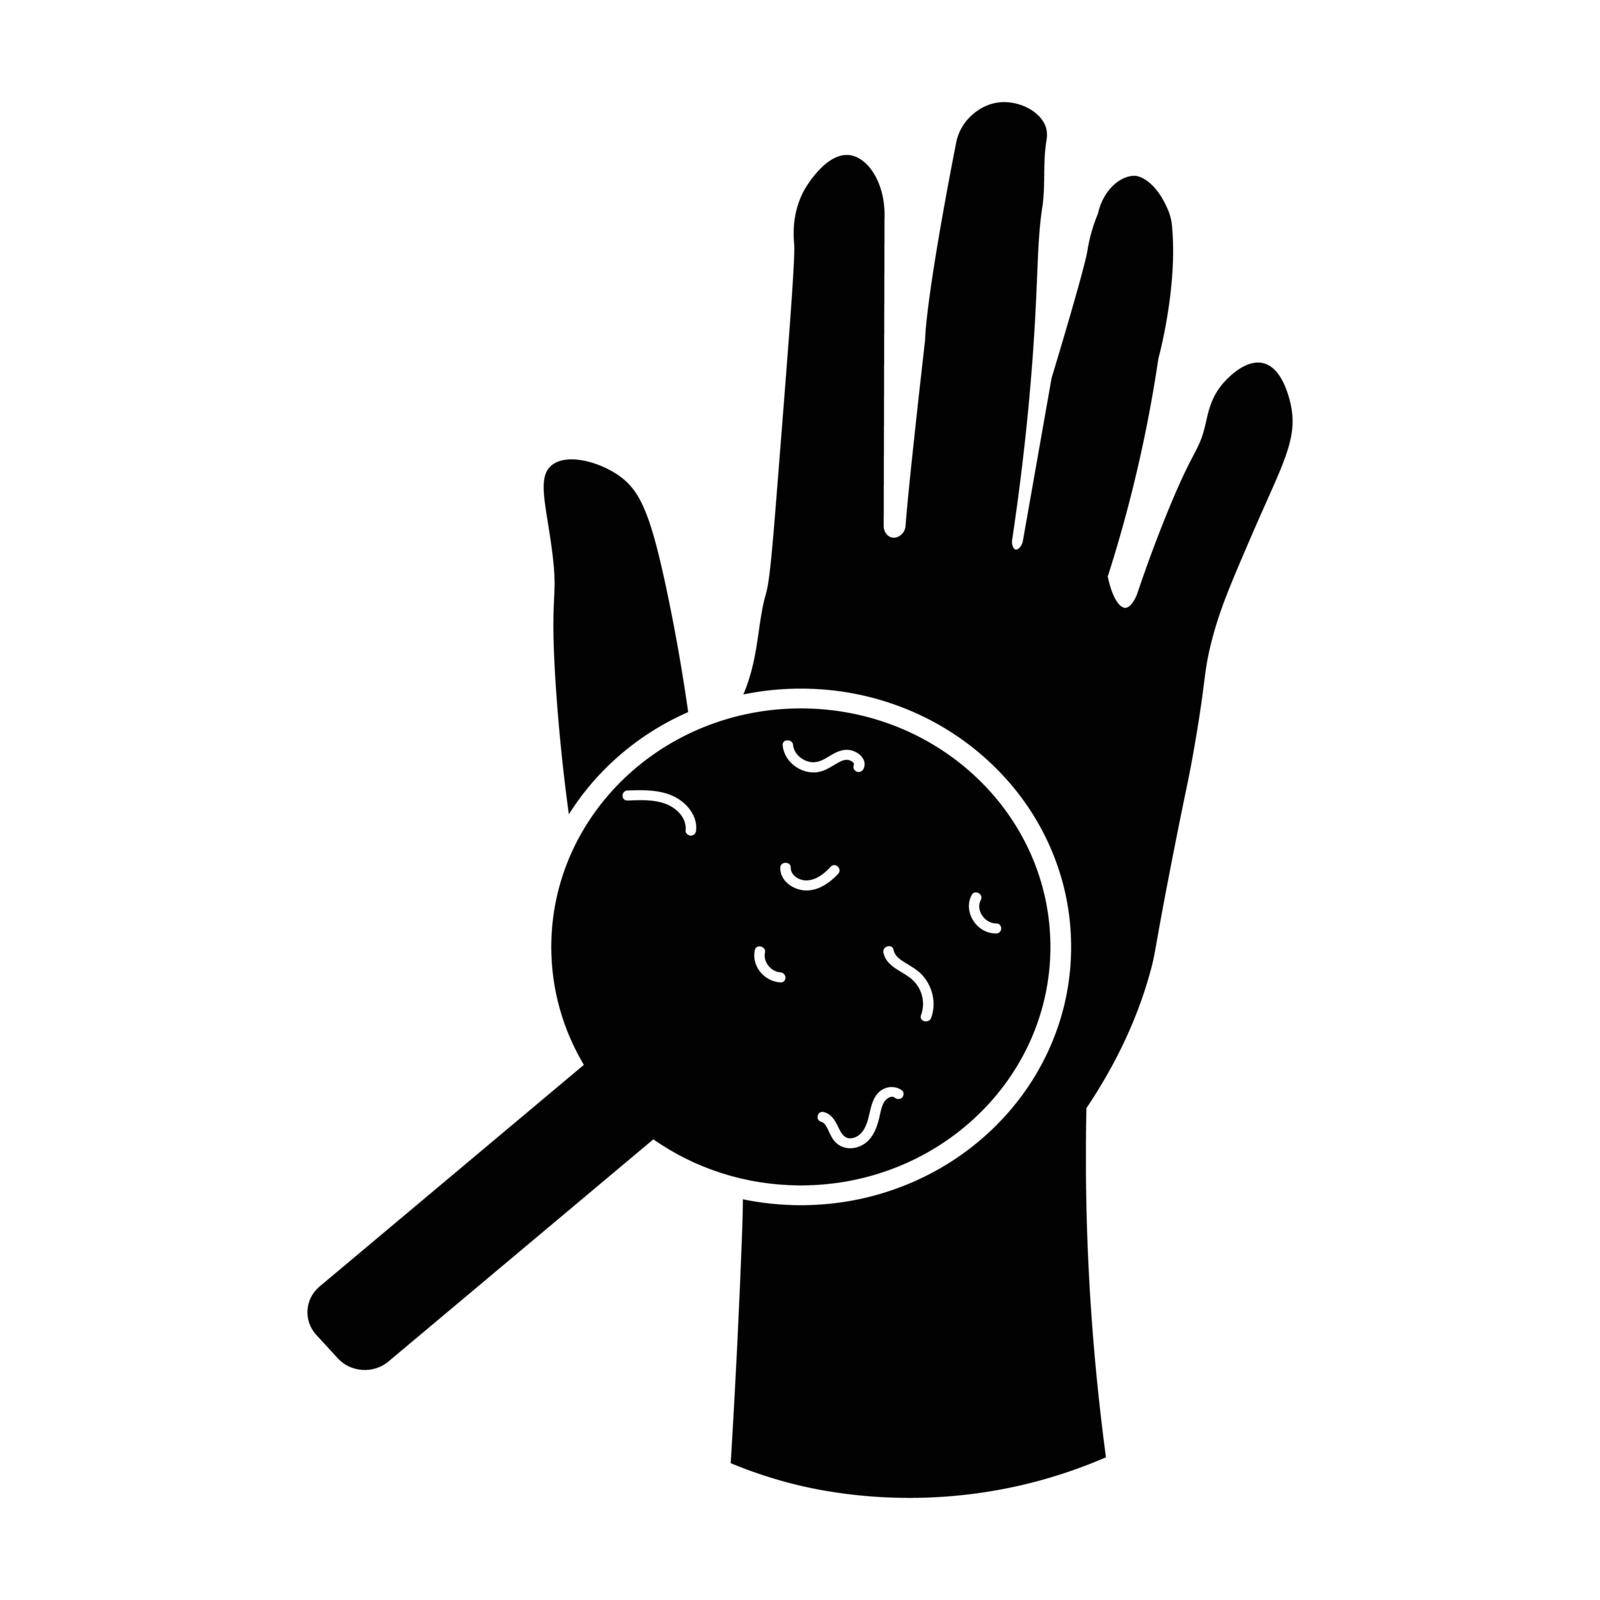 Germs Virus Bacteria on Hand Palm Using Magnifying Glass. Black and White EPS Vector by xileodesigns